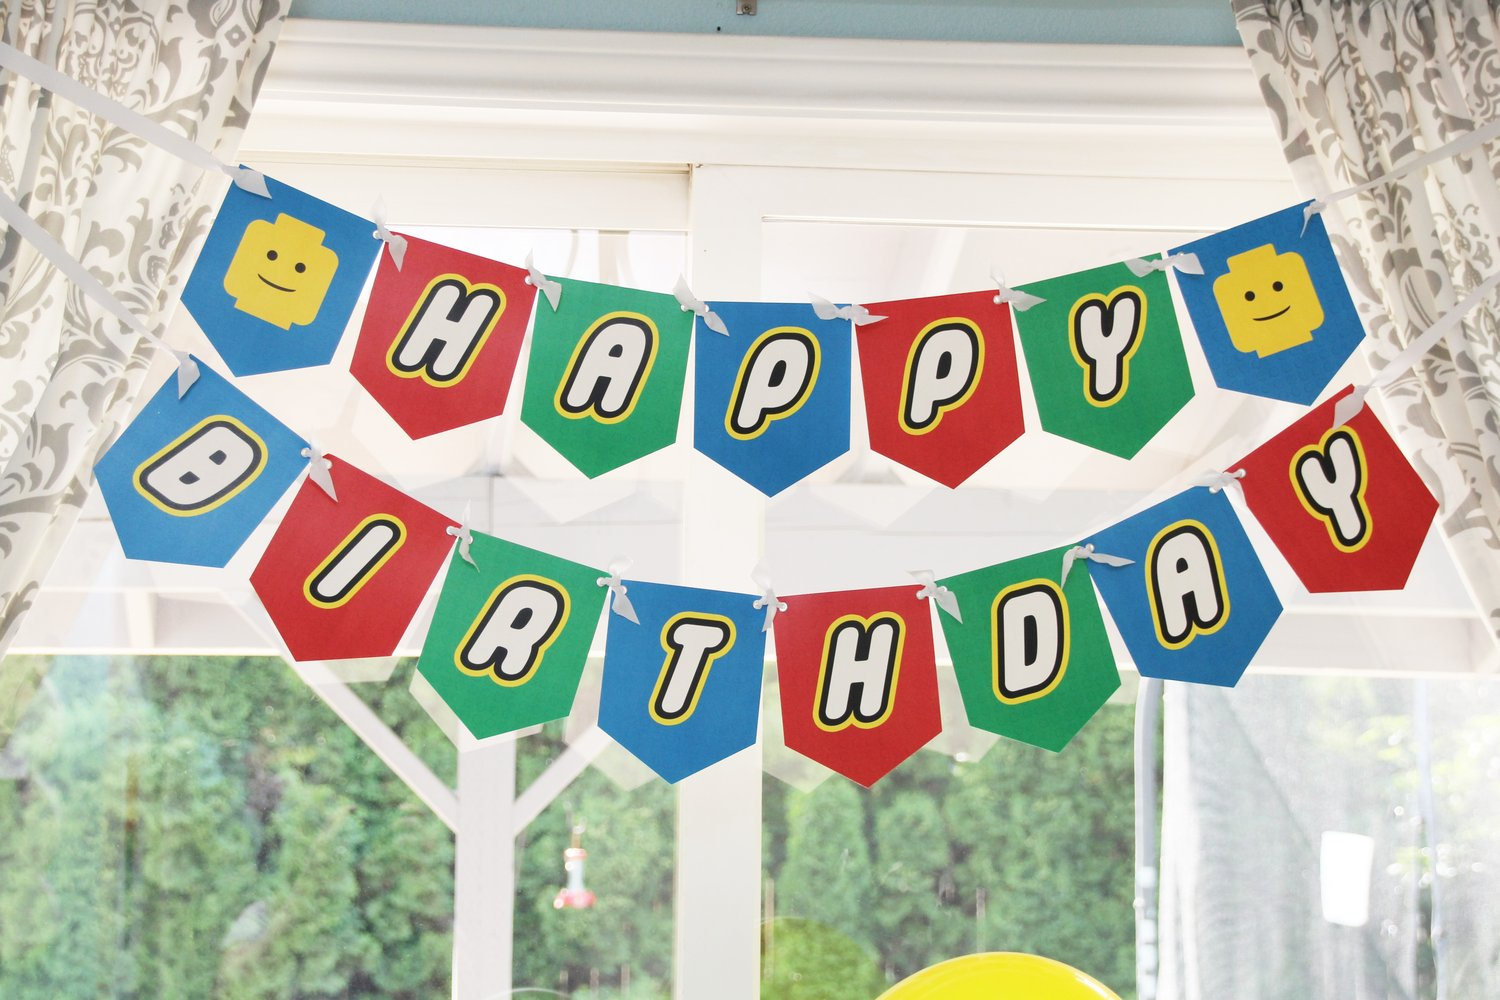 Free Lego Inspired Party Printable Decorations – Instant Download intended for Free Printable Lego Banner